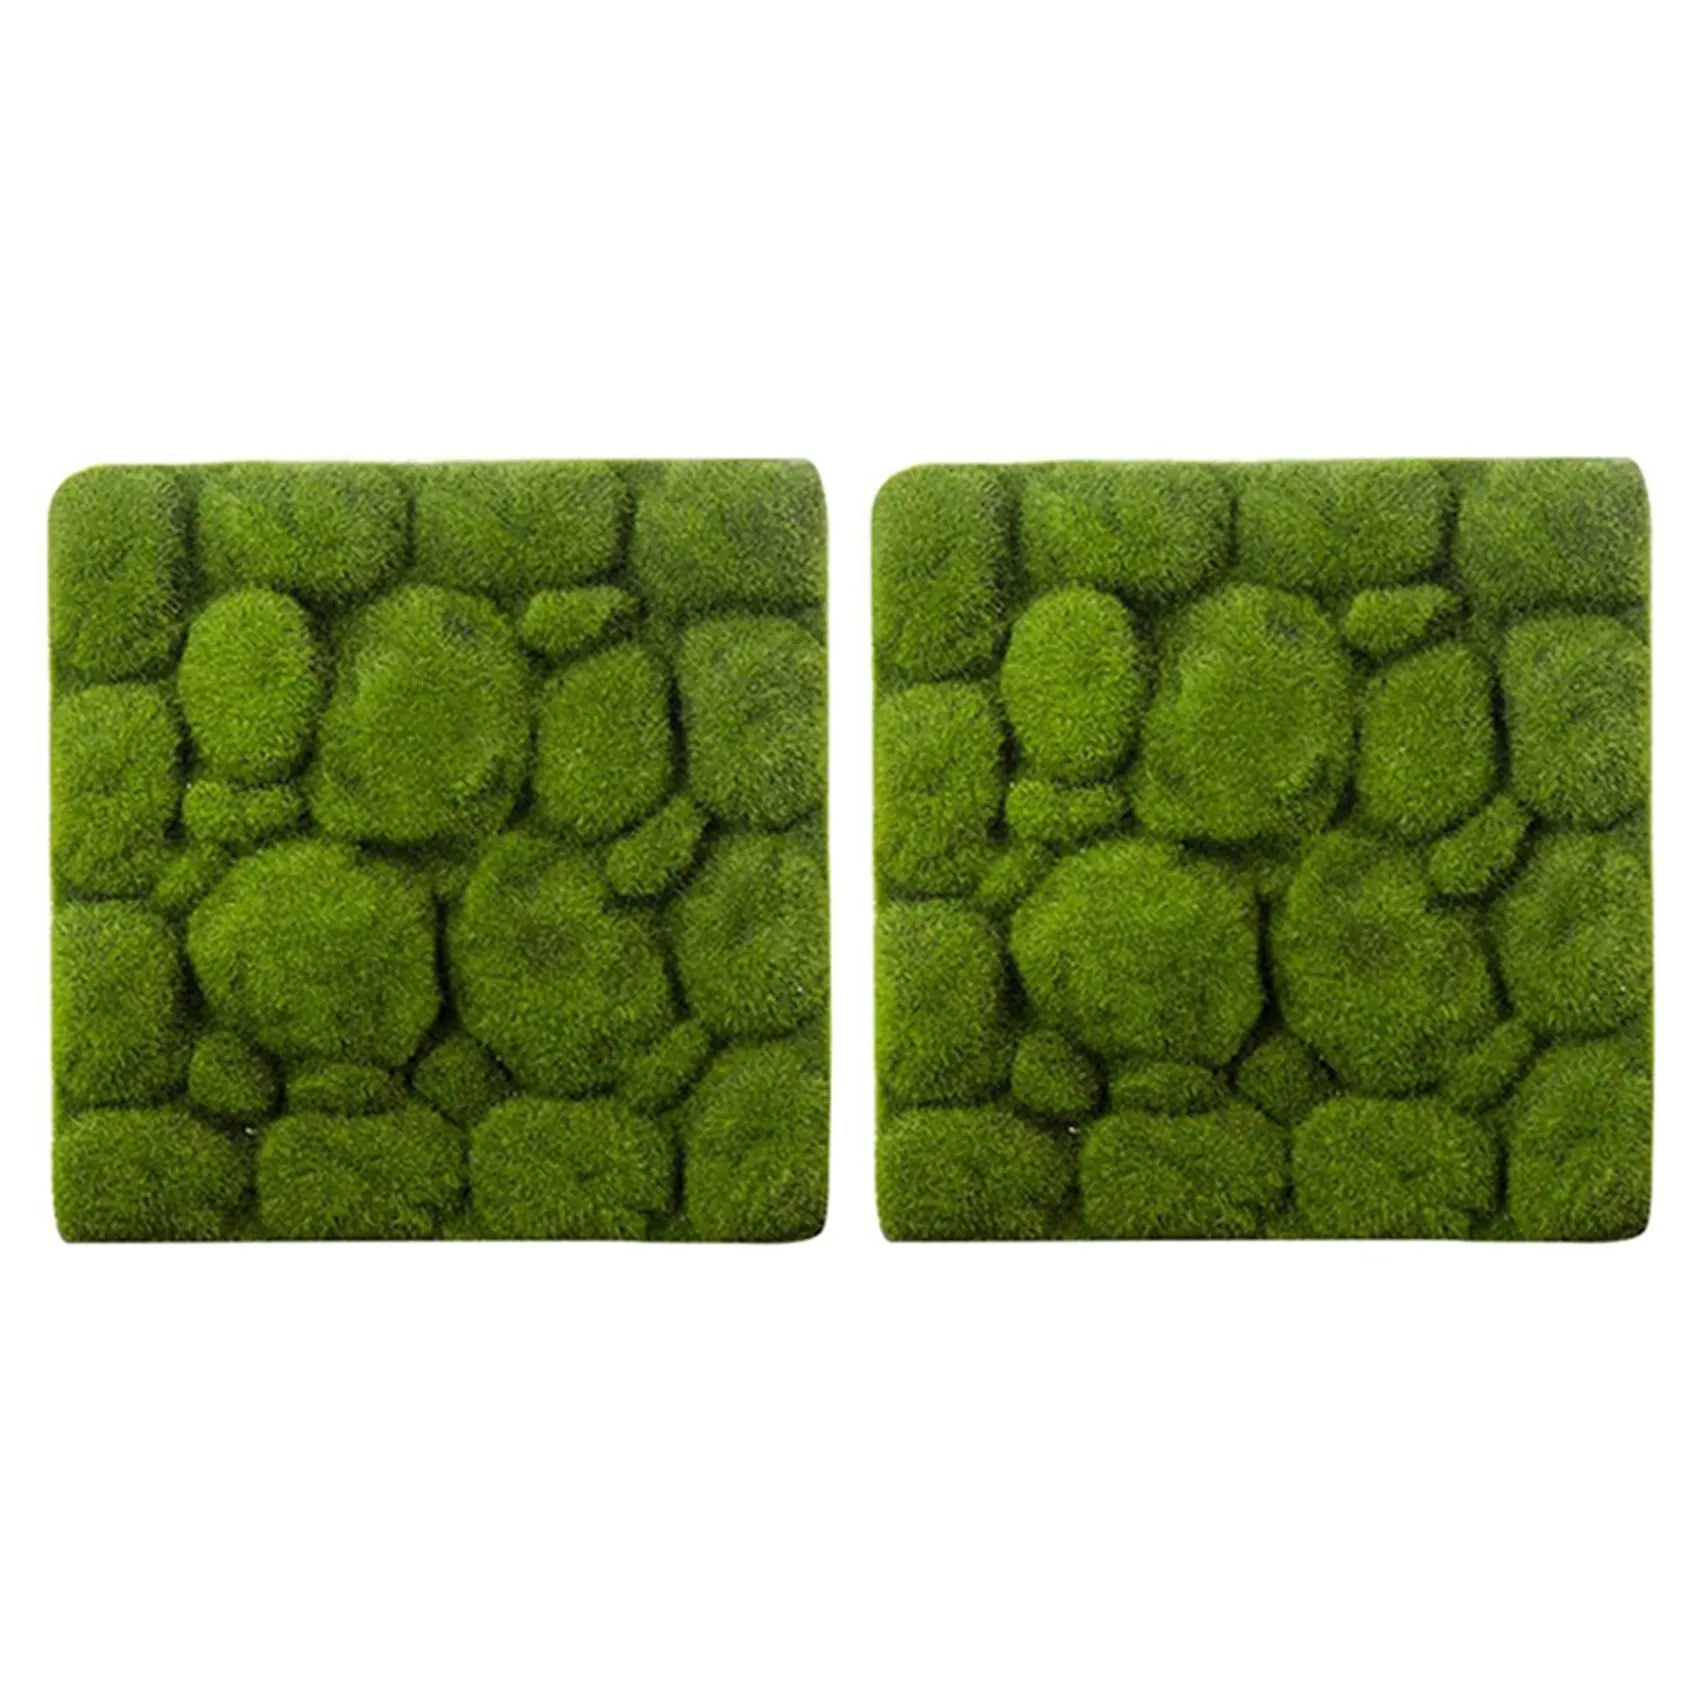 

2X Grass Mat- Stone Shape Indoor Green Artificial Lawns Turf Carpets Fake Sod Moss for Home Hotel Wall Balcony Decor